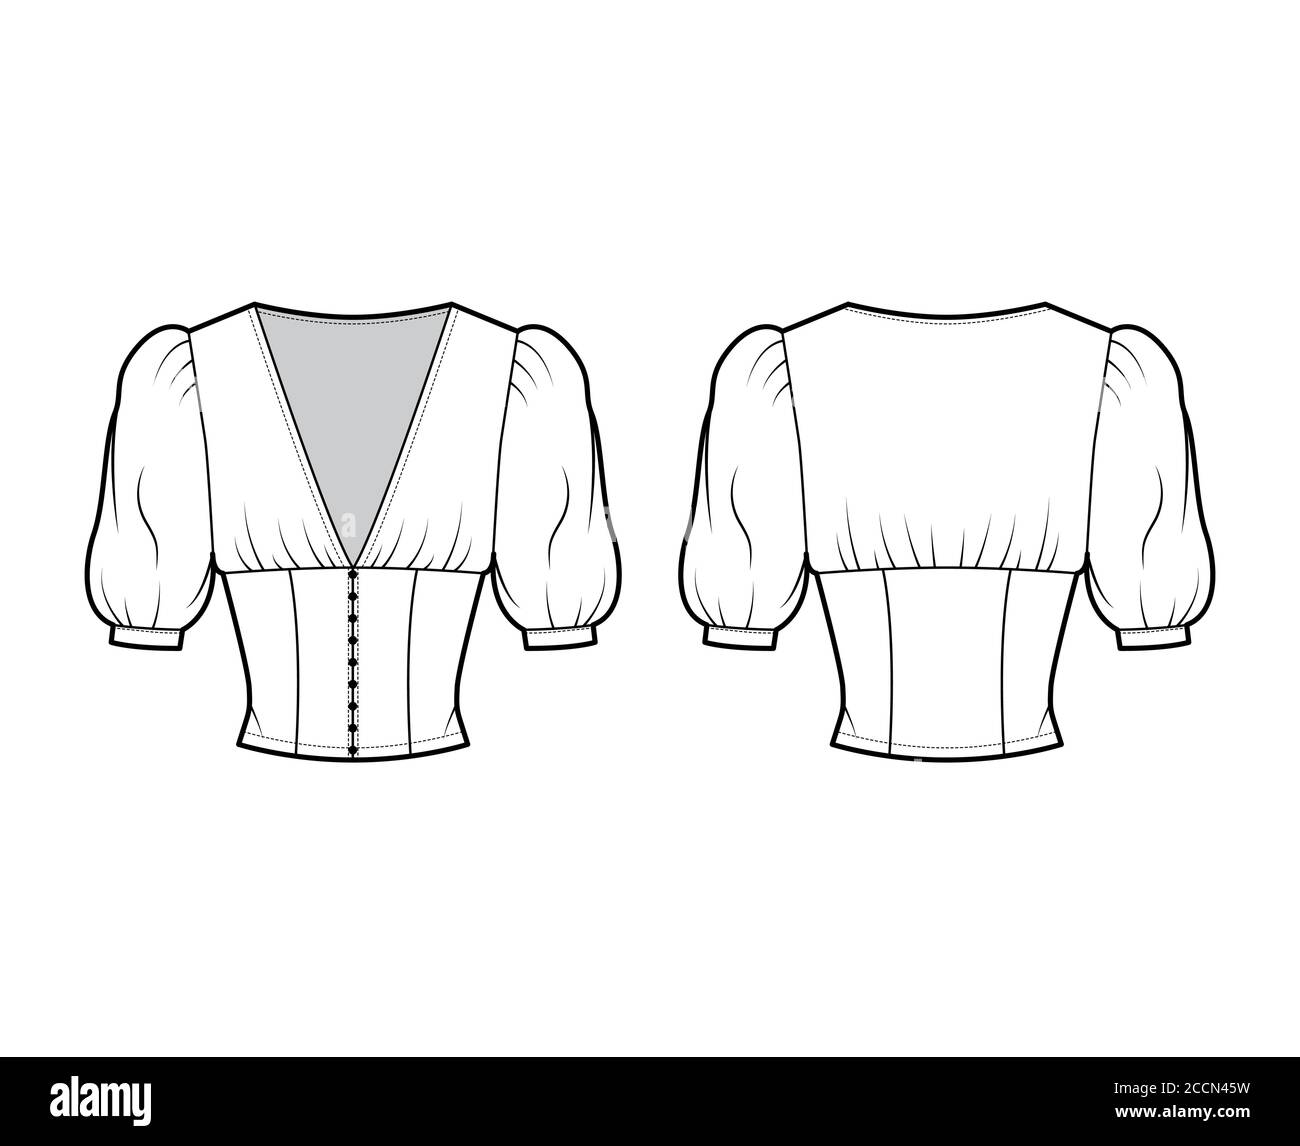 Cropped top technical fashion illustration with short sleeves, puffed shoulders, front button fastenings, fitted body. Flat apparel shirt template front back white color. Women men, unisex blouse CAD Stock Vector